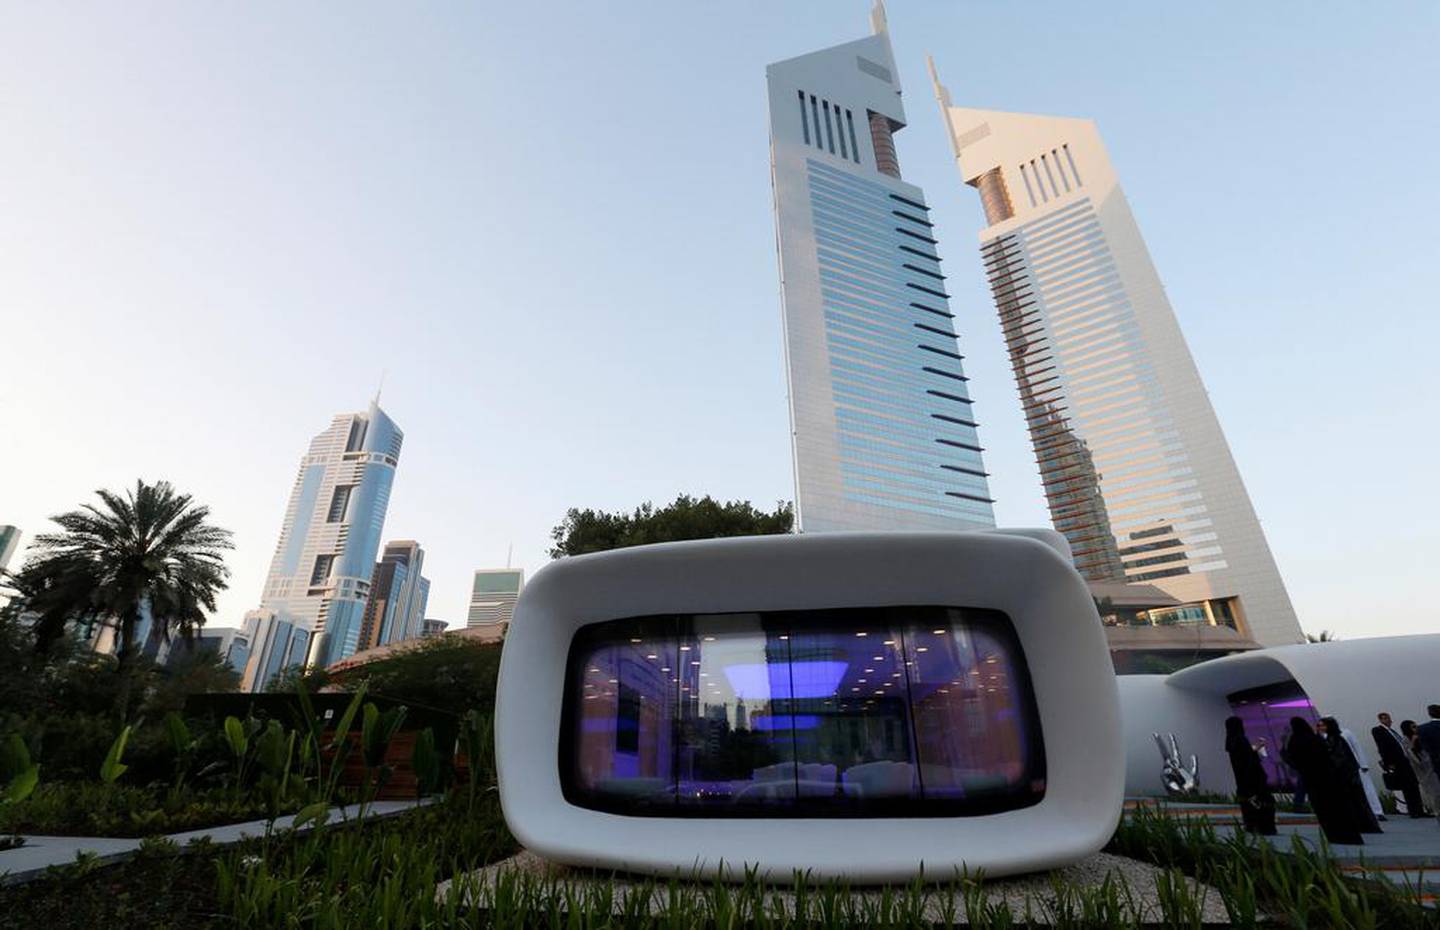 Dubai is home to the world's first functional 3D printed offices. The UAE aims to have 25 per cent of its buildings similarly manufactured by 2030. Ahmed Jadallah / Reuters